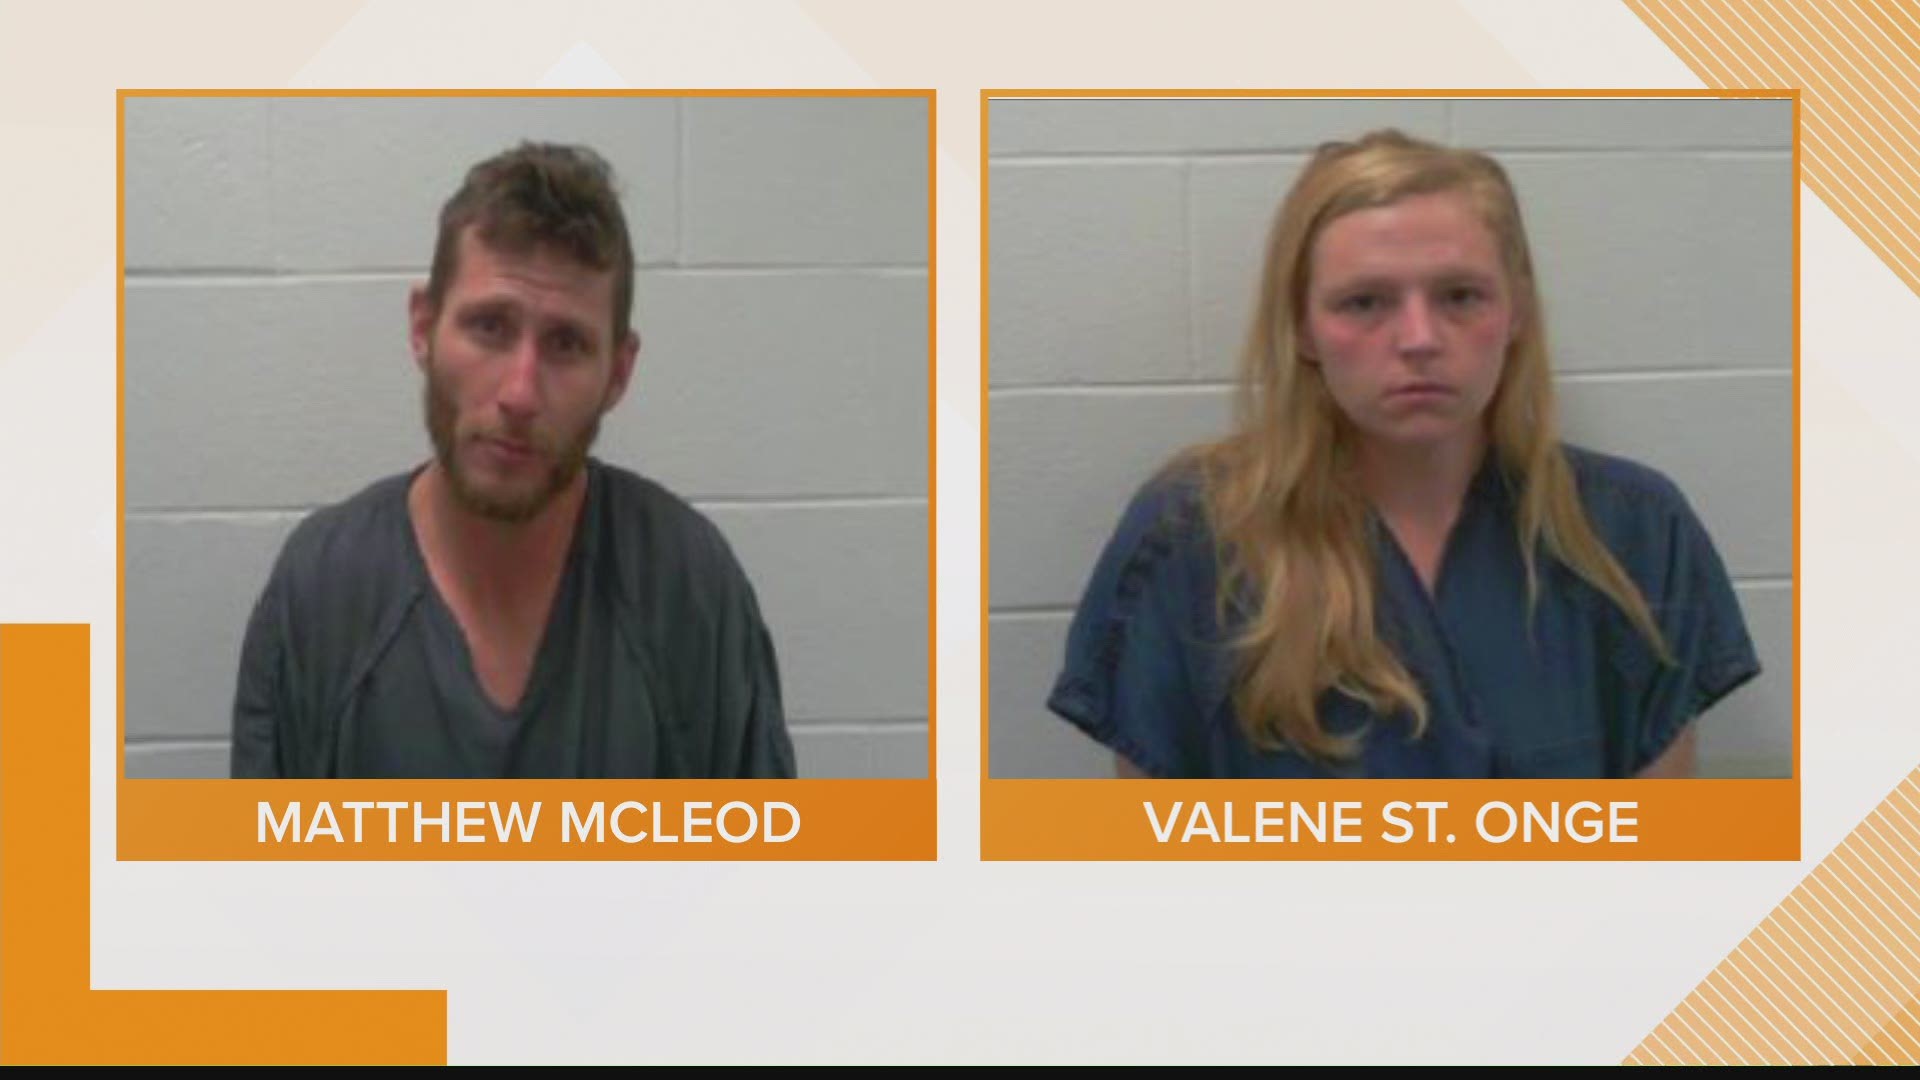 Police in Auburn are investigating how a 9-month-old child overdosed on Fentanyl. The parents were arrested on drug charges and custody of the child taken away.